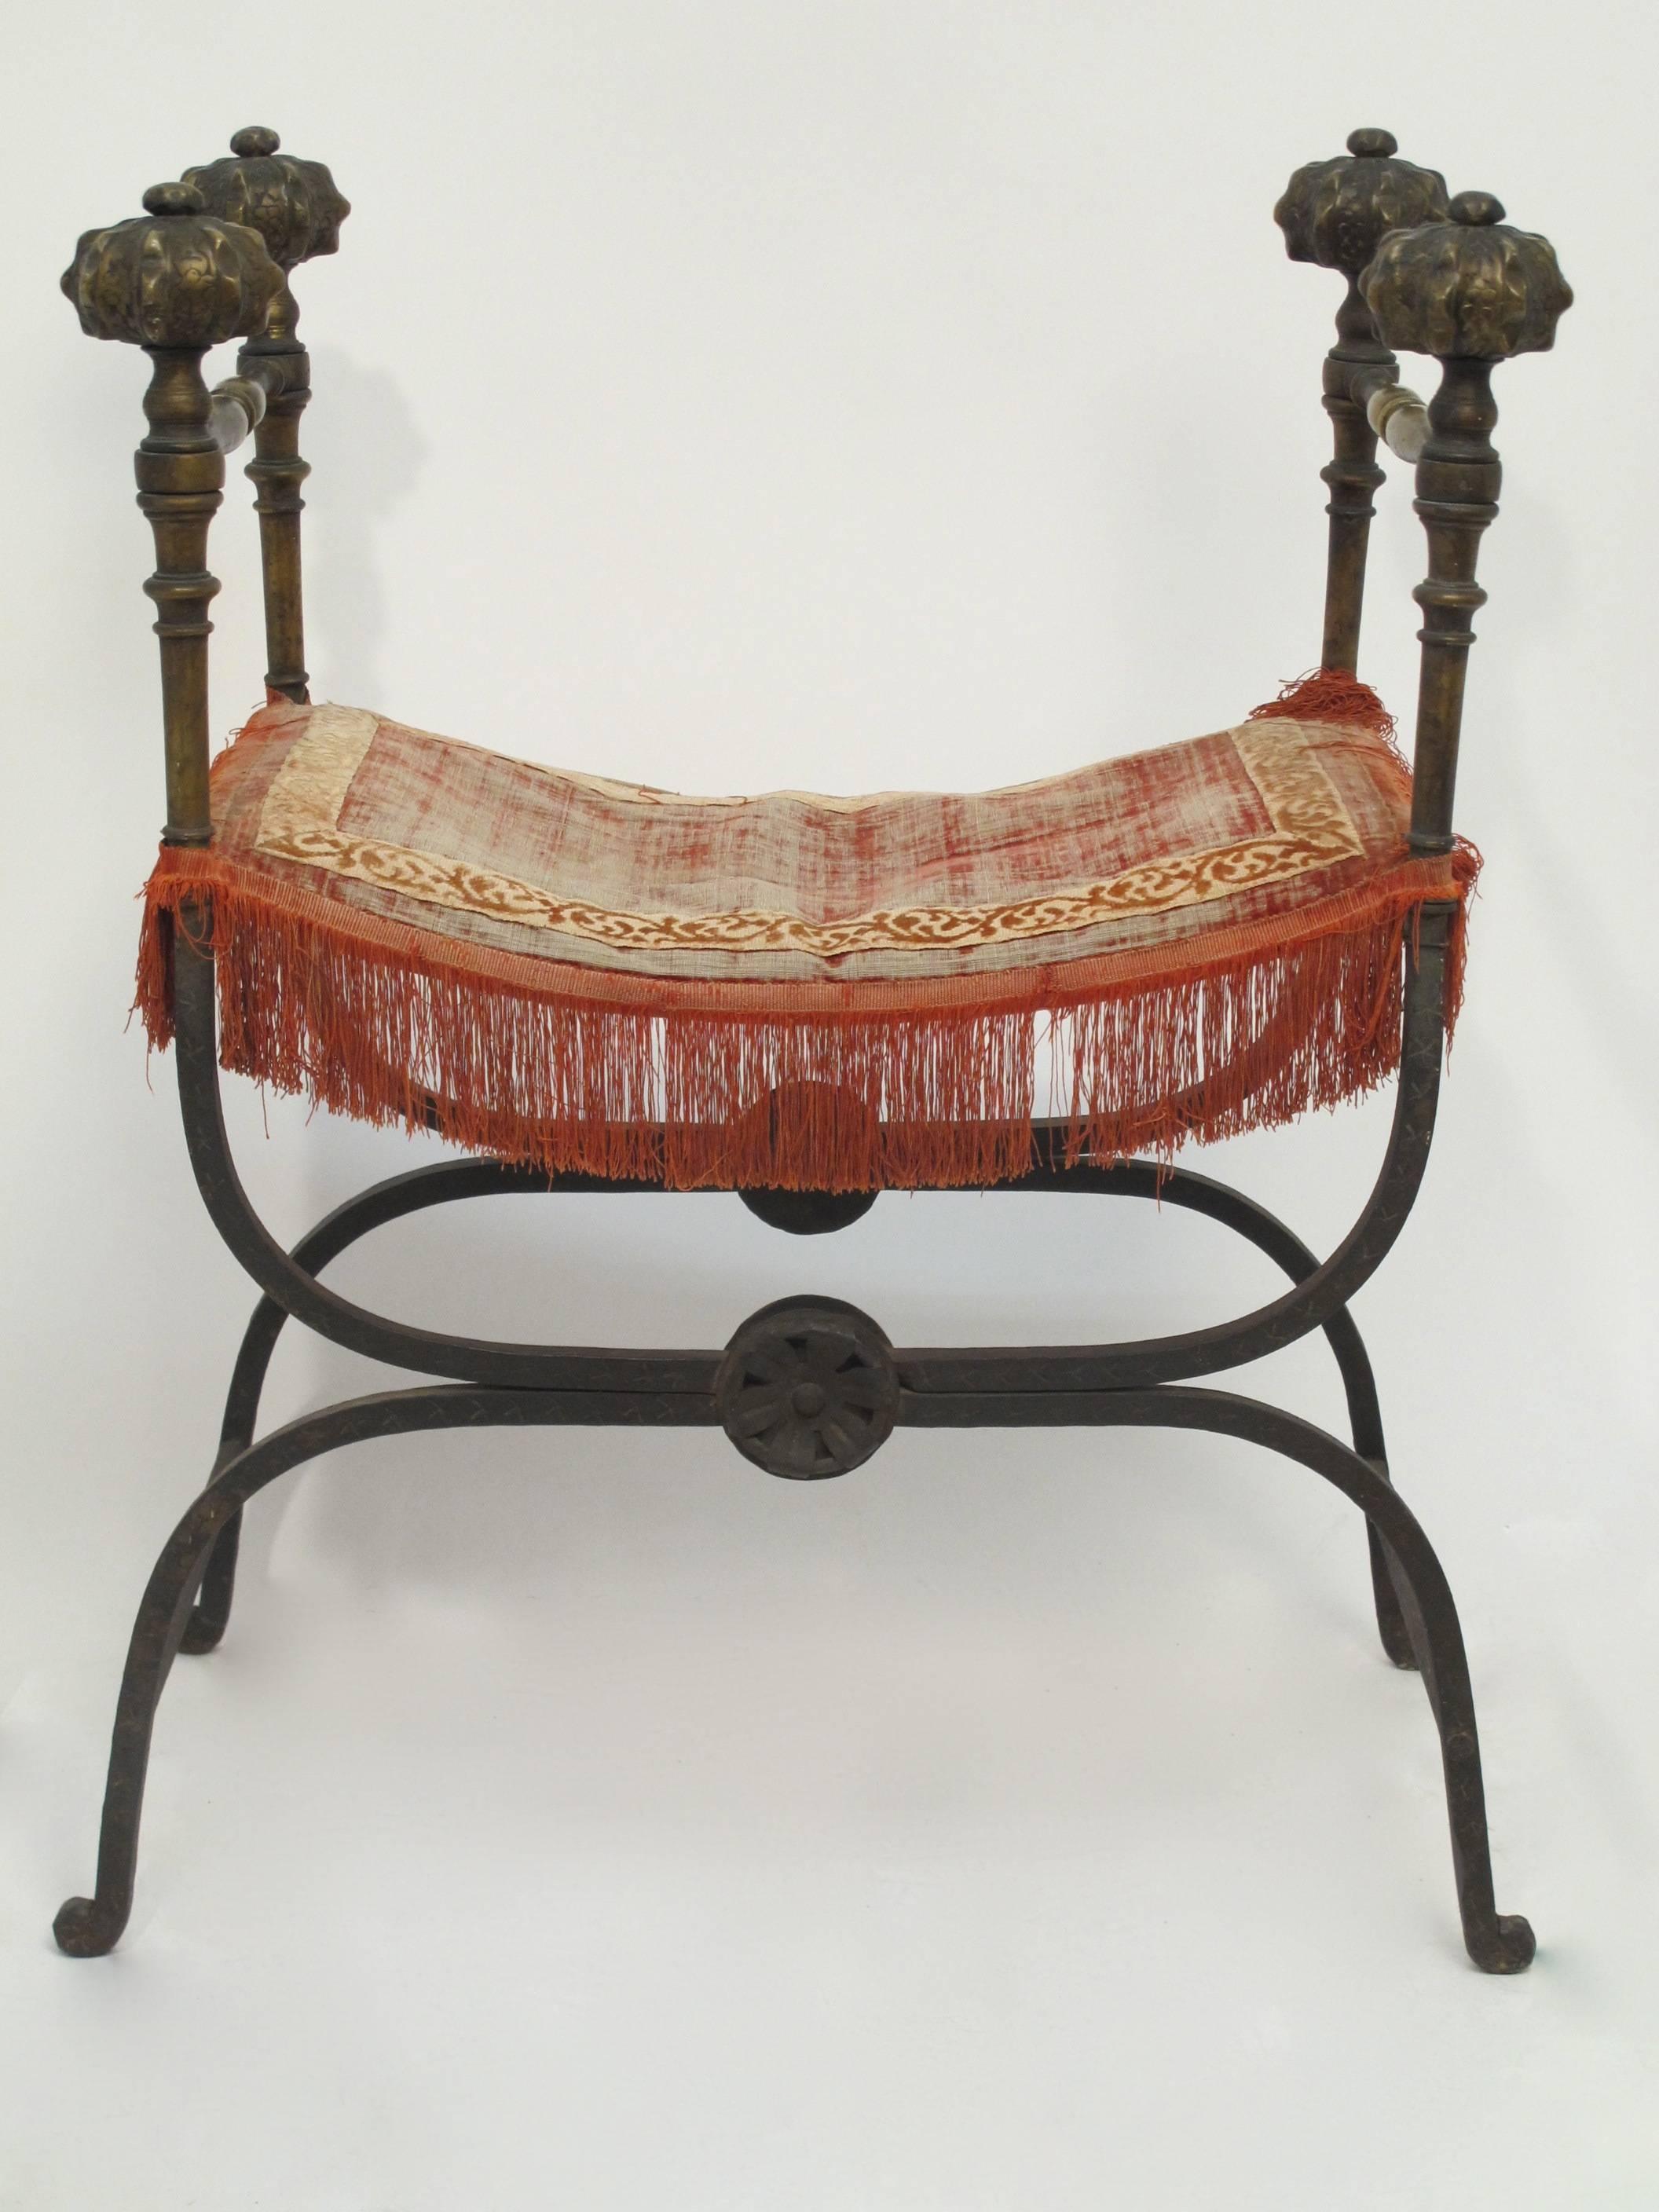 A 19th century savonarola style chair or bench, all hand wrought iron with four ornate bronze finials. Original unrestored condition.